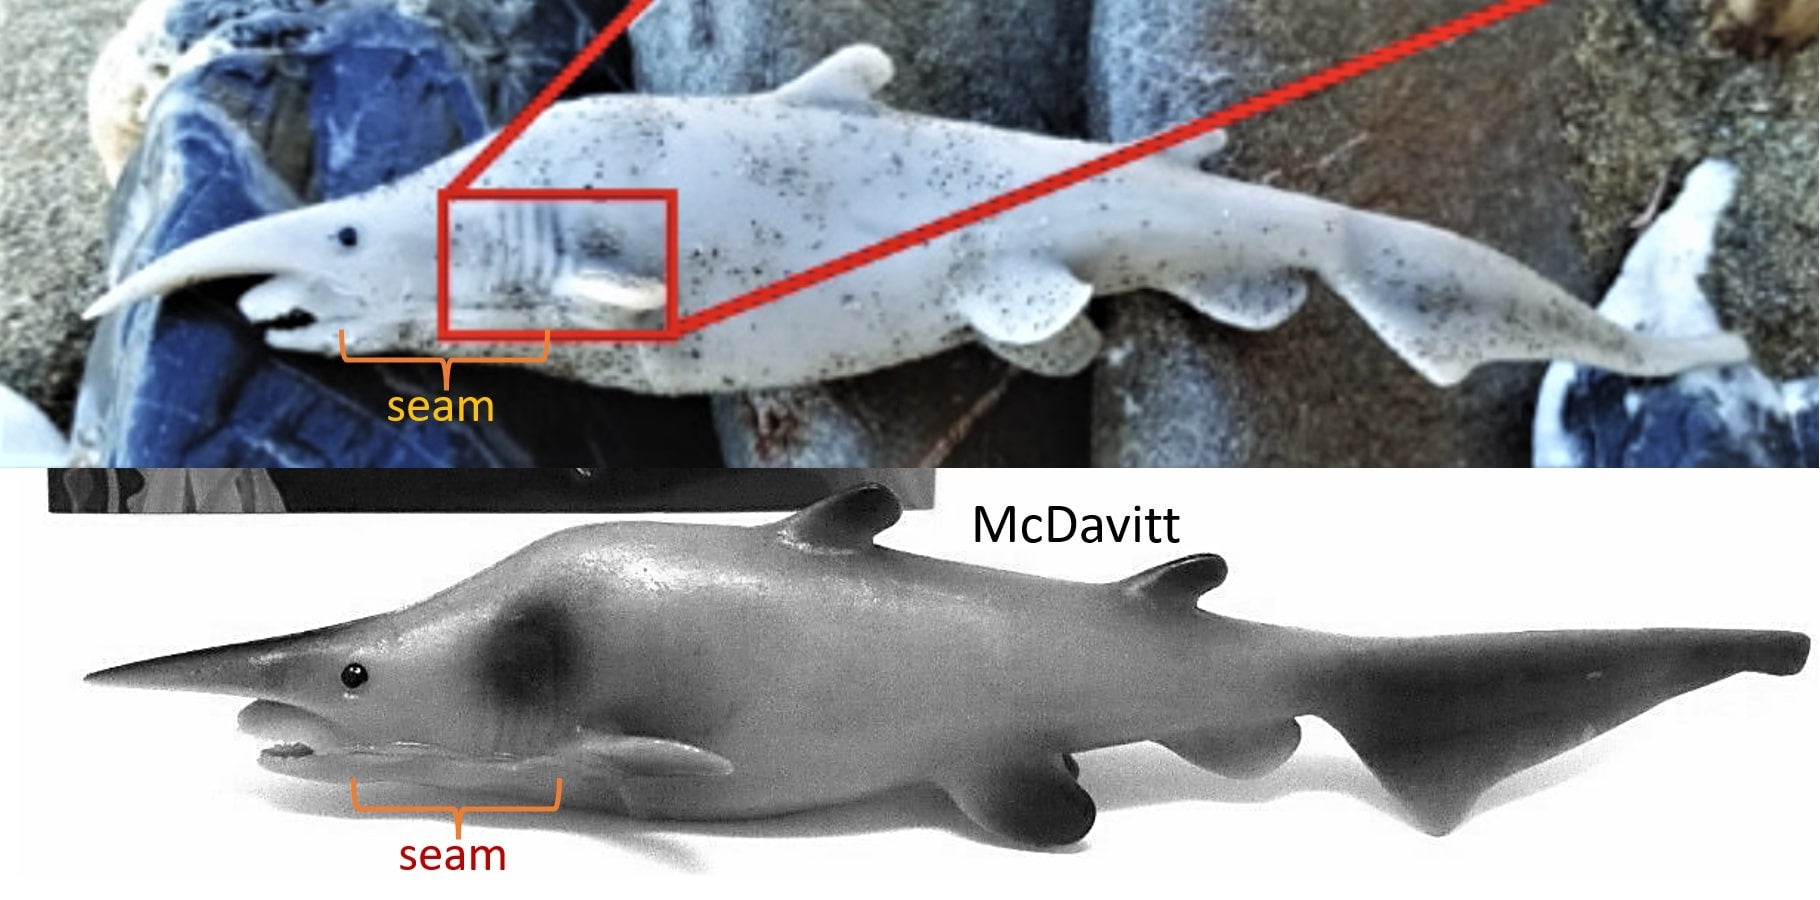 The top photo is the alleged specimen found on a beach. The bottom photo is the toy shark that many believe fooled the scientists. Highlighted is what Matthew McDavitt believes is the plastic mould seam, visible on the purported real animal.  (Image: Matthew McDavitt)